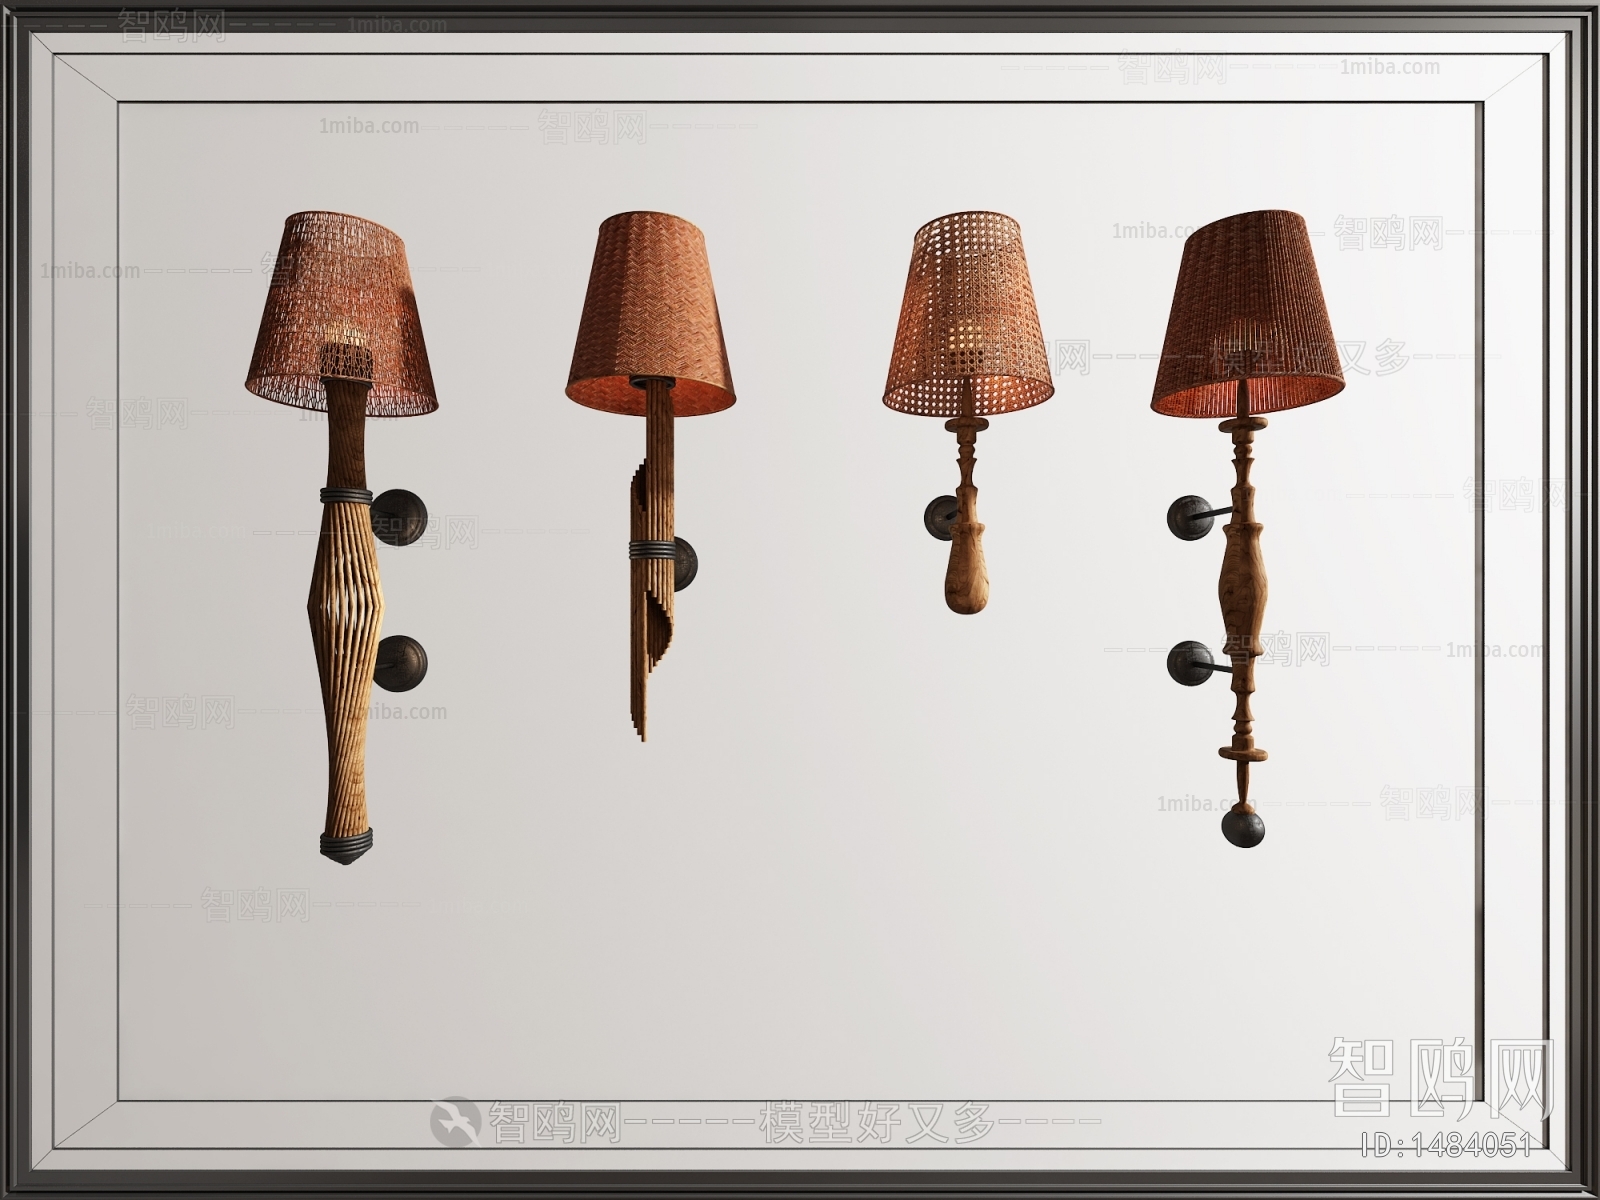 New Chinese Style Wall Lamp